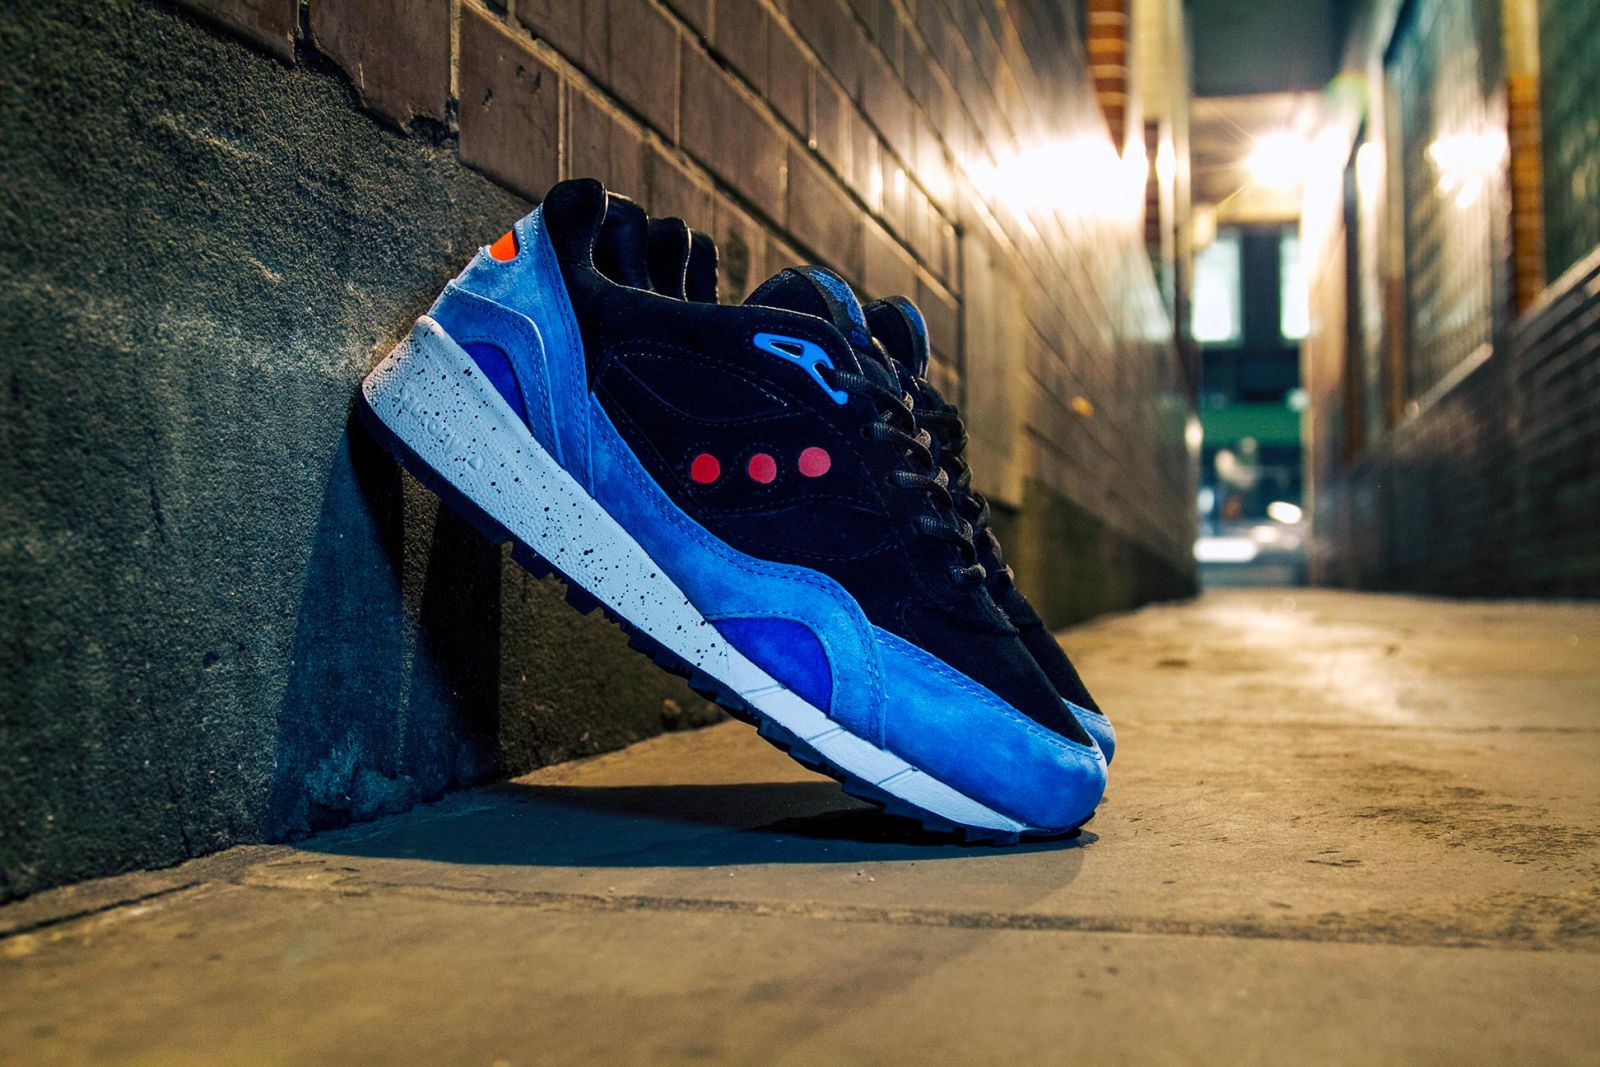 Footpatrol x Saucony Shadow 6000 Only in Soho collaboration